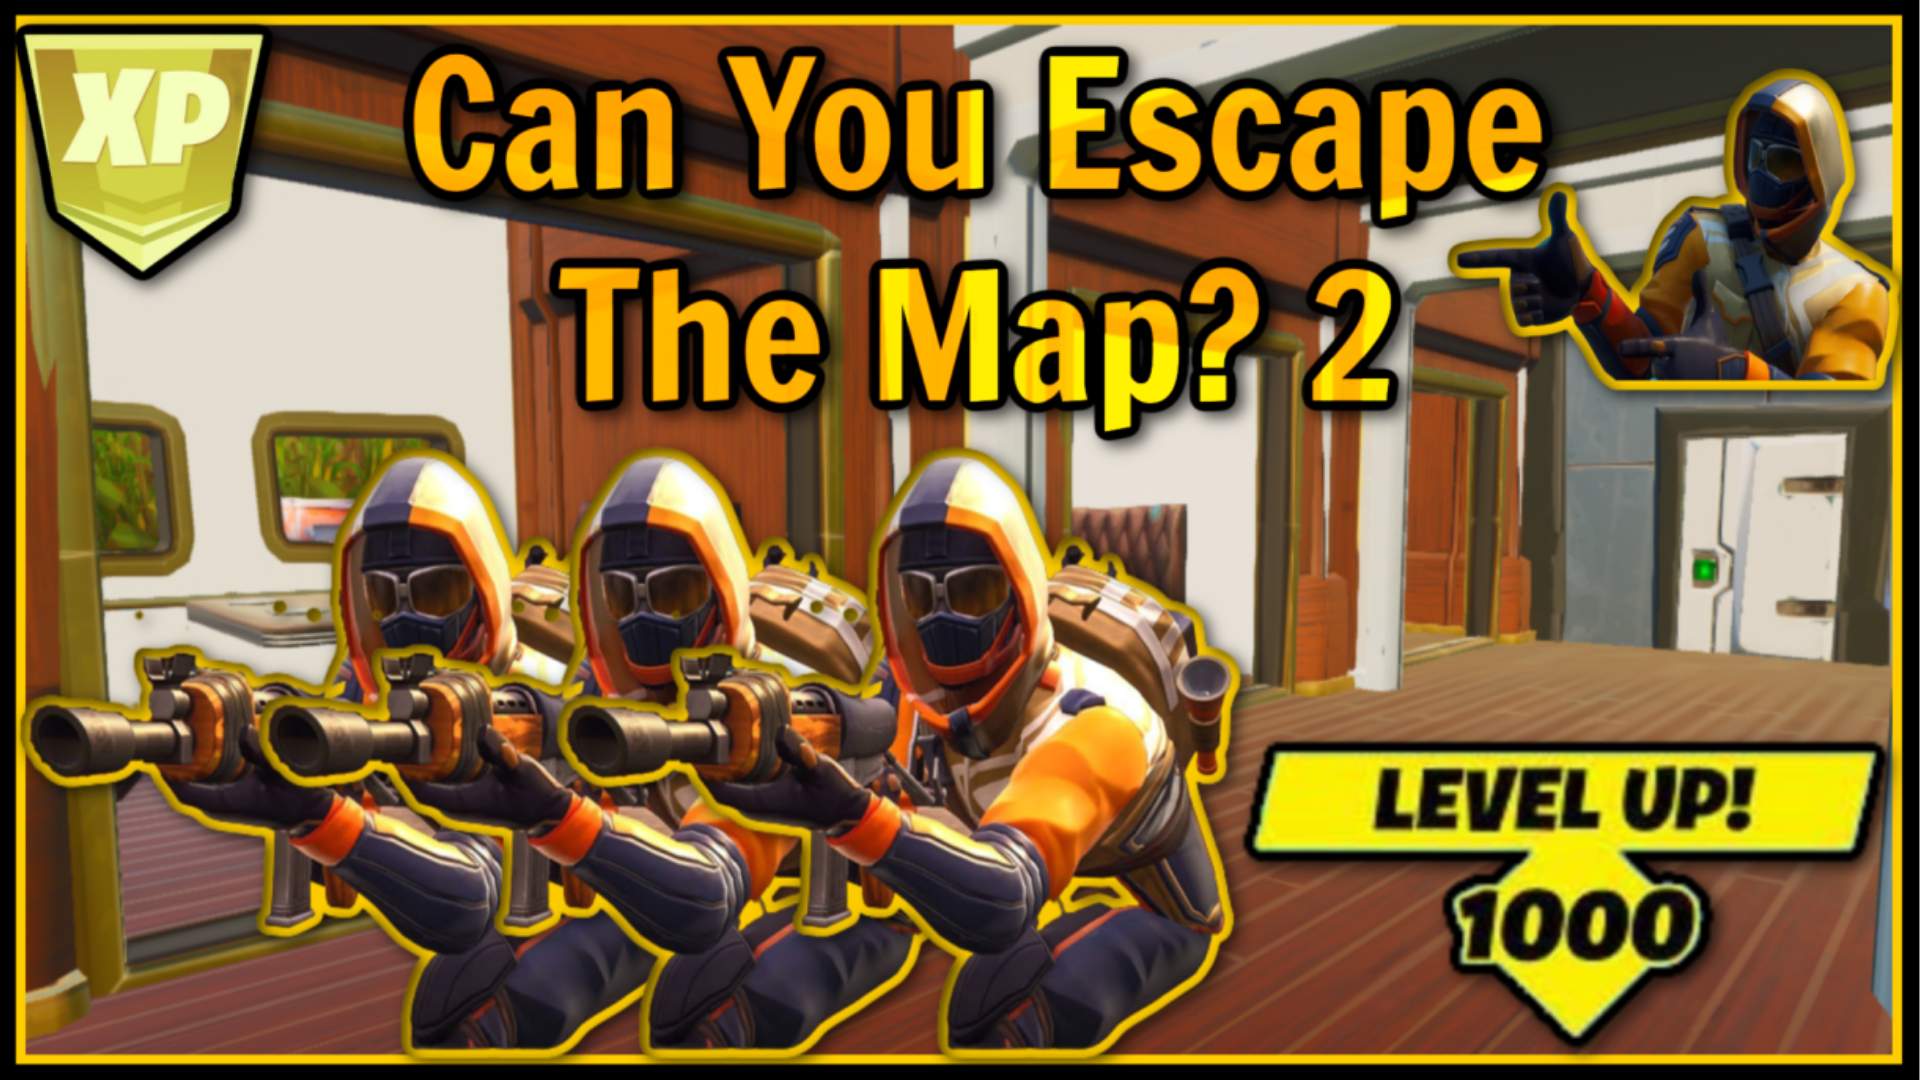 CAN YOU ESCAPE THE MAP? 2